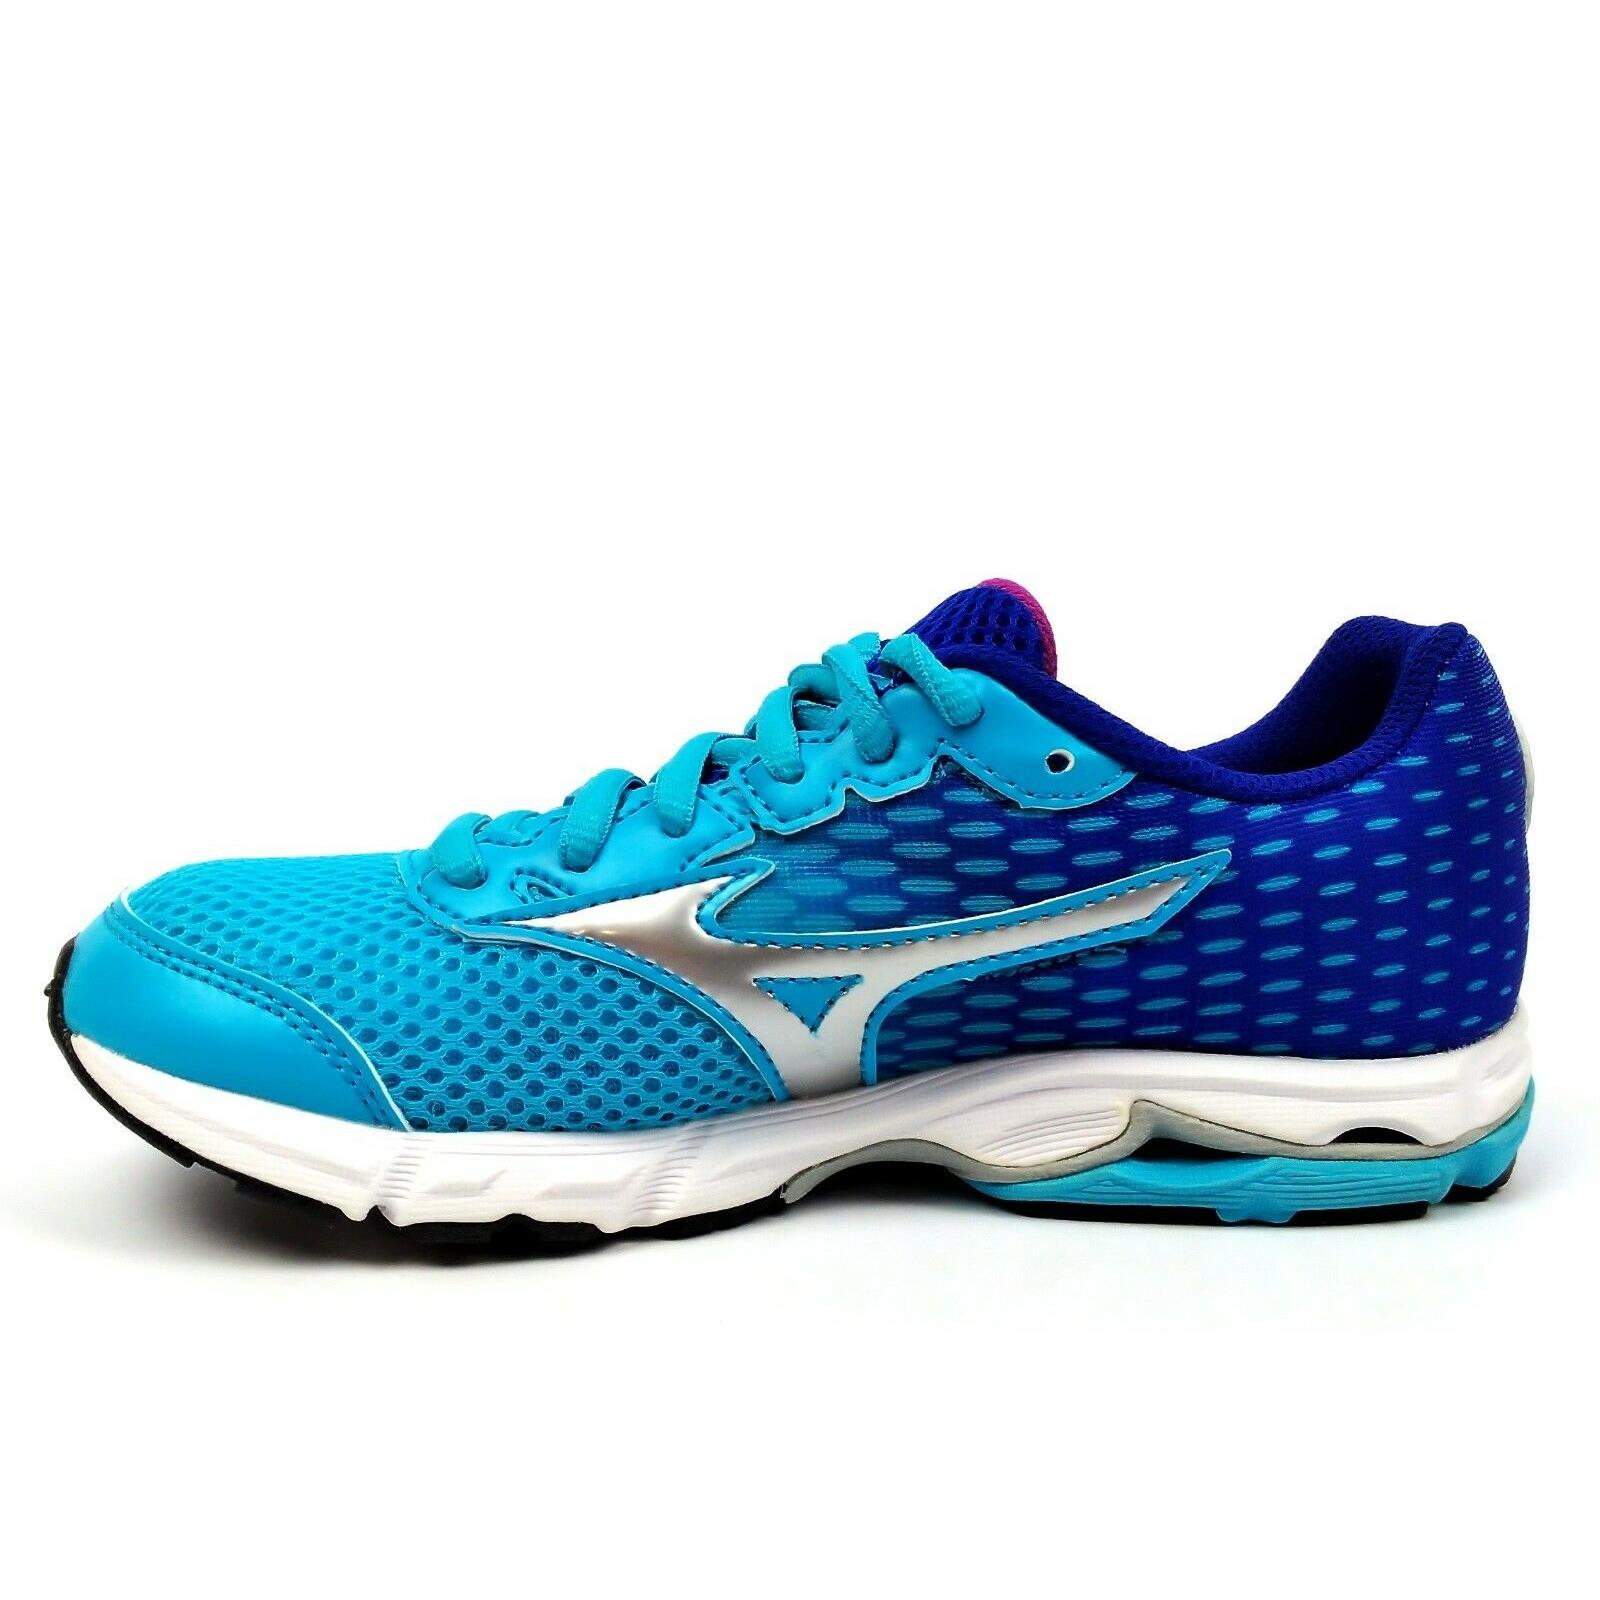 Abuse Hen Laboratory Mizuno Youth Kids Wave Rider 18 Running Shoes Blue White Maroon Size 2.5 |  041969514702 - Mizuno shoes Shoes - White | SporTipTop